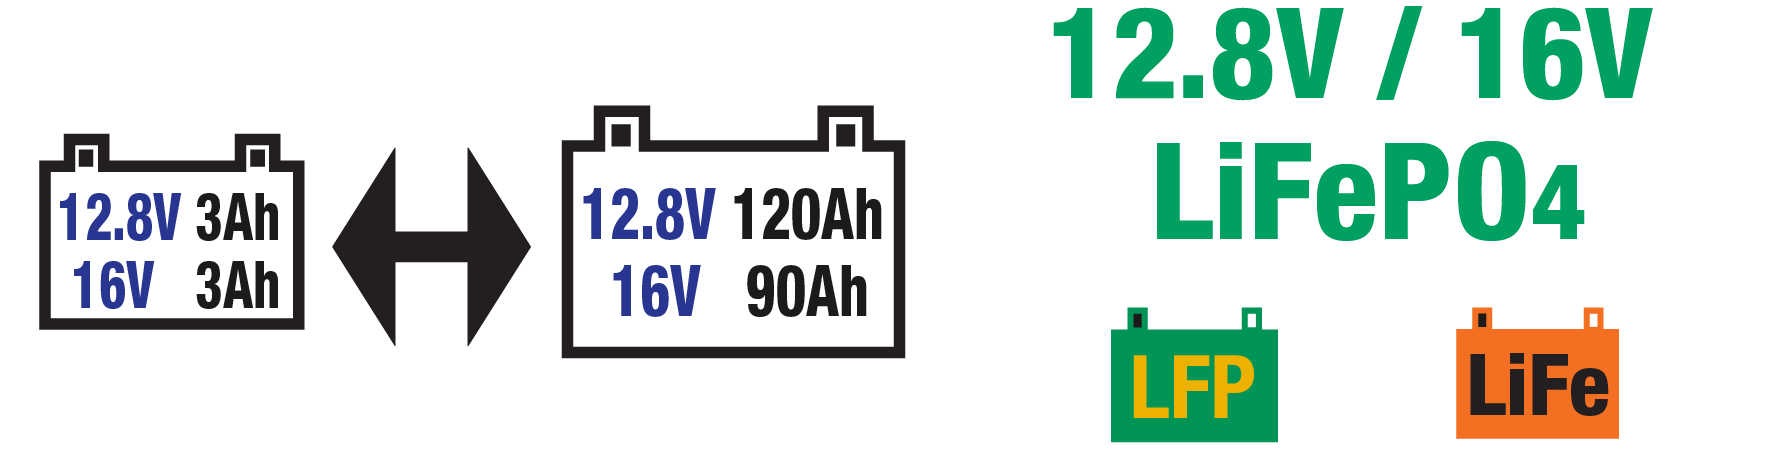 The LiFePO4 is ideal for 12.8V/16V LiFePO4 / LFP batteries.